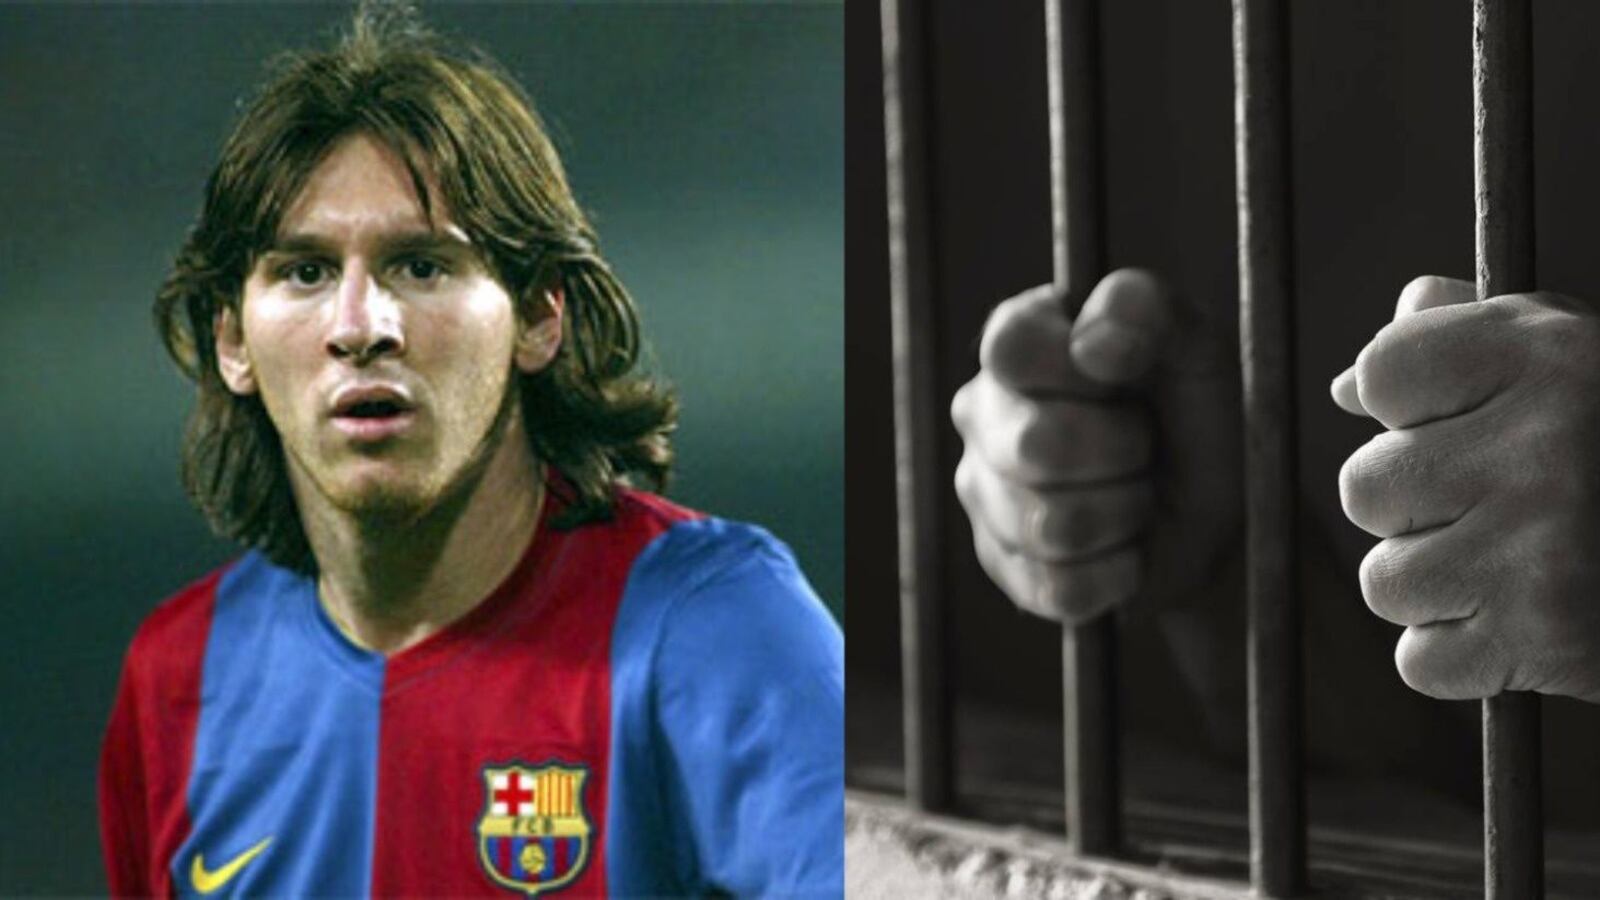 Messi was his fan and he was one of the best in the world, now they sentence him to years behind bars